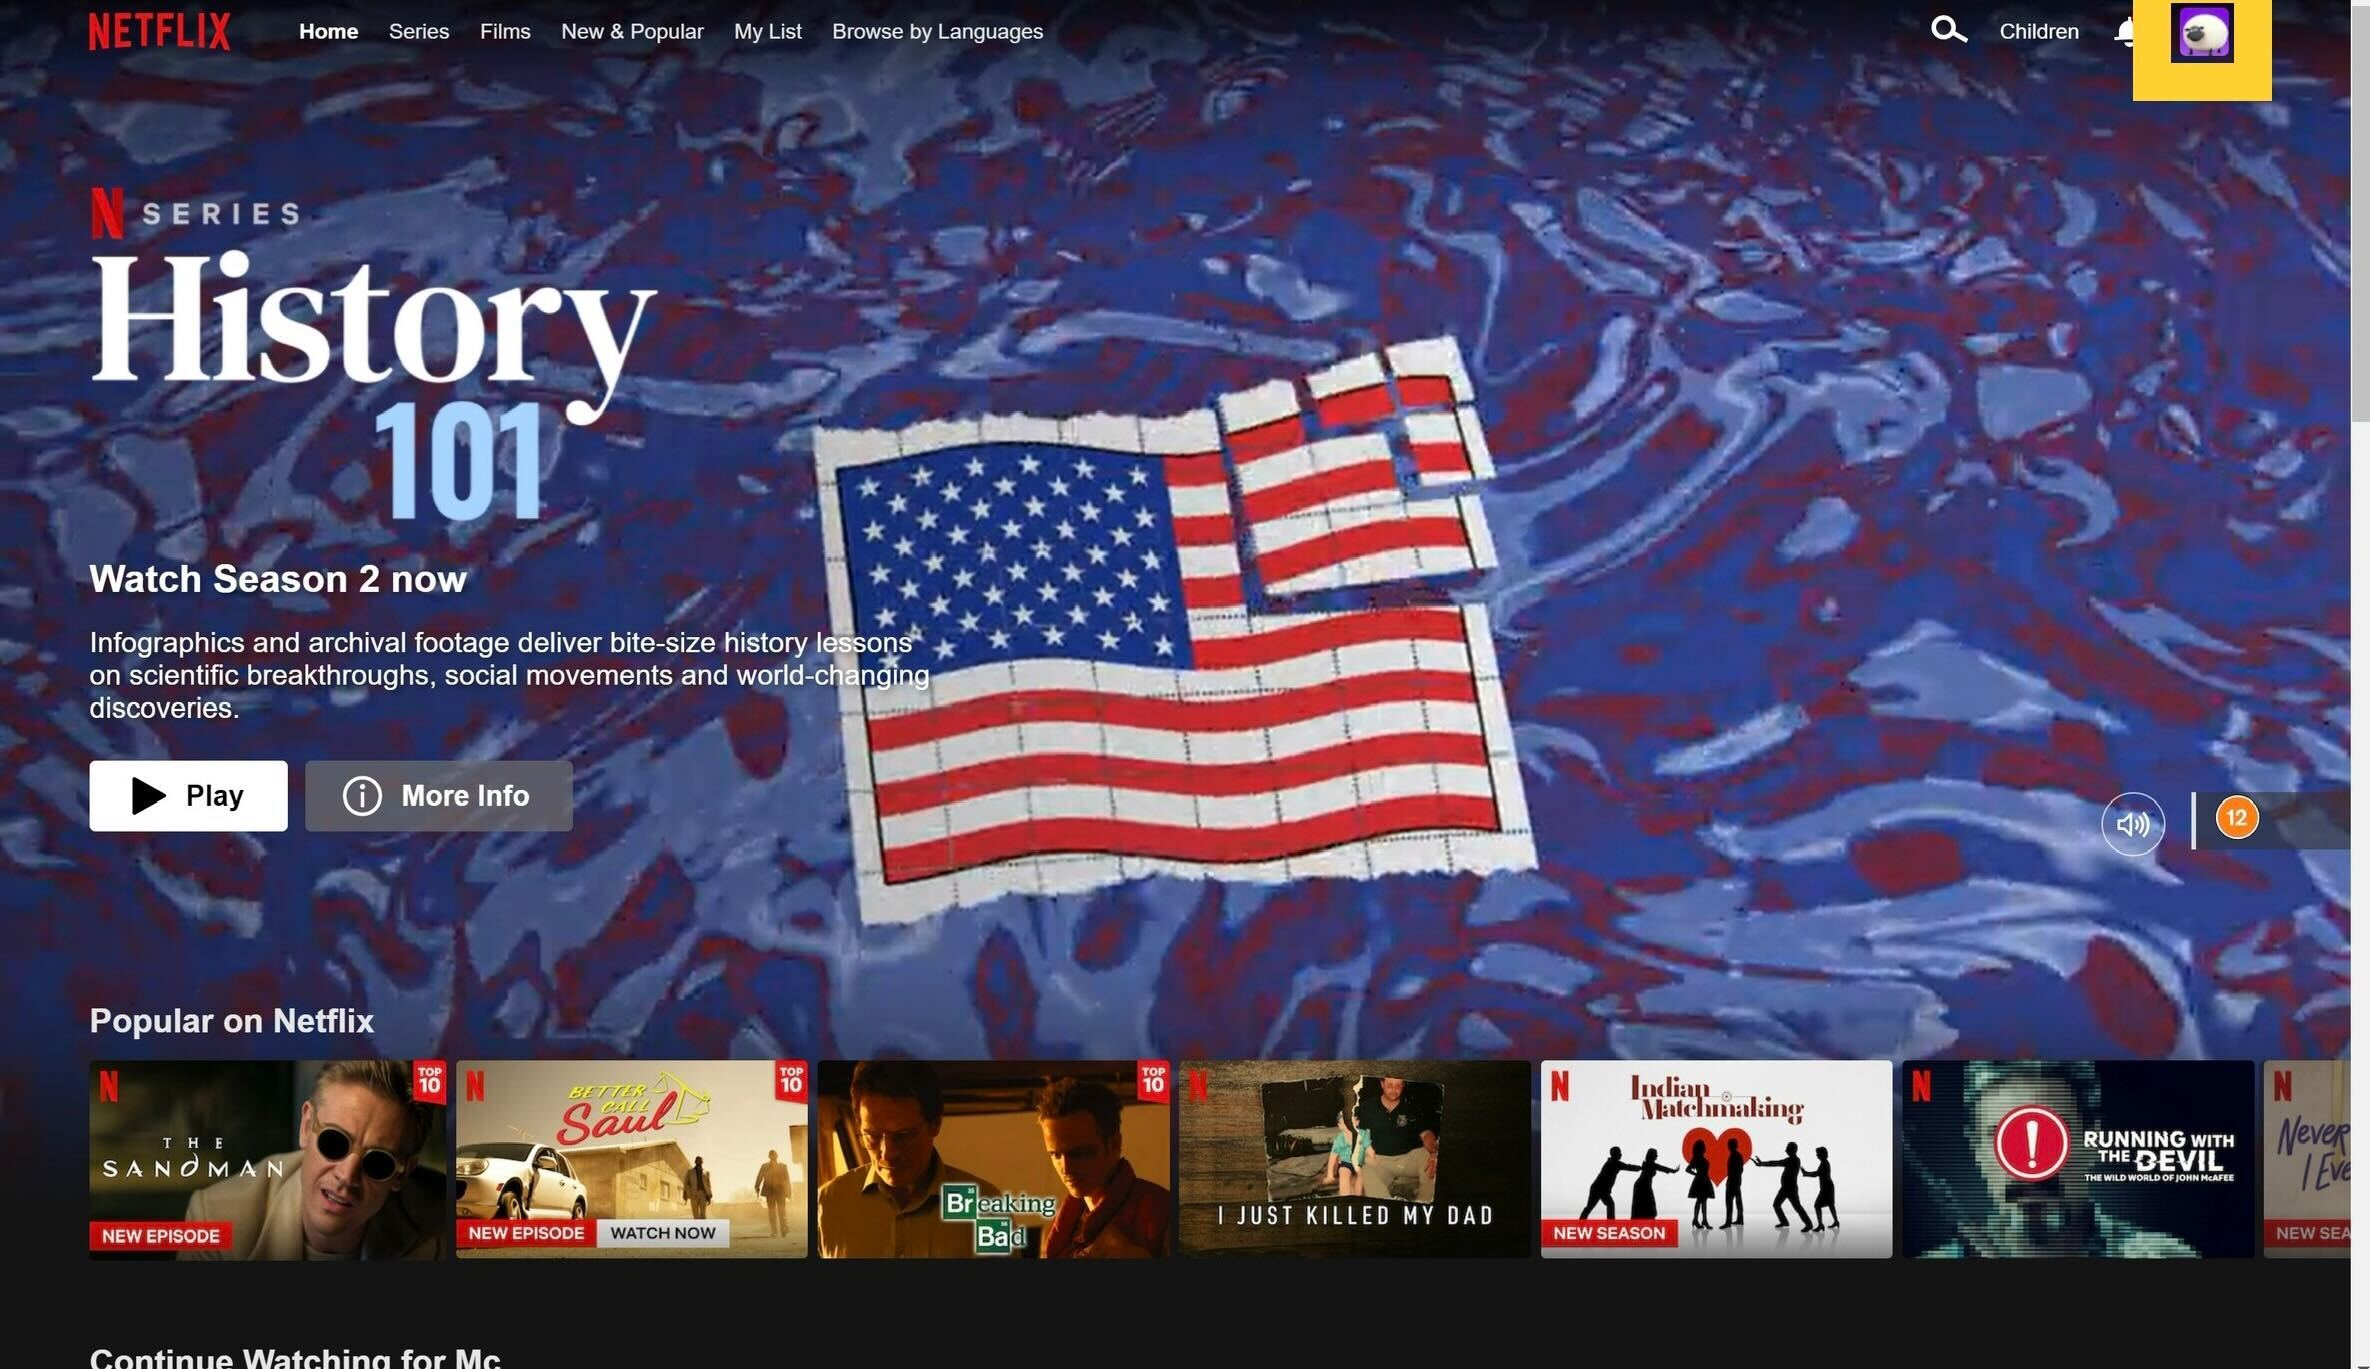 The netflix home page